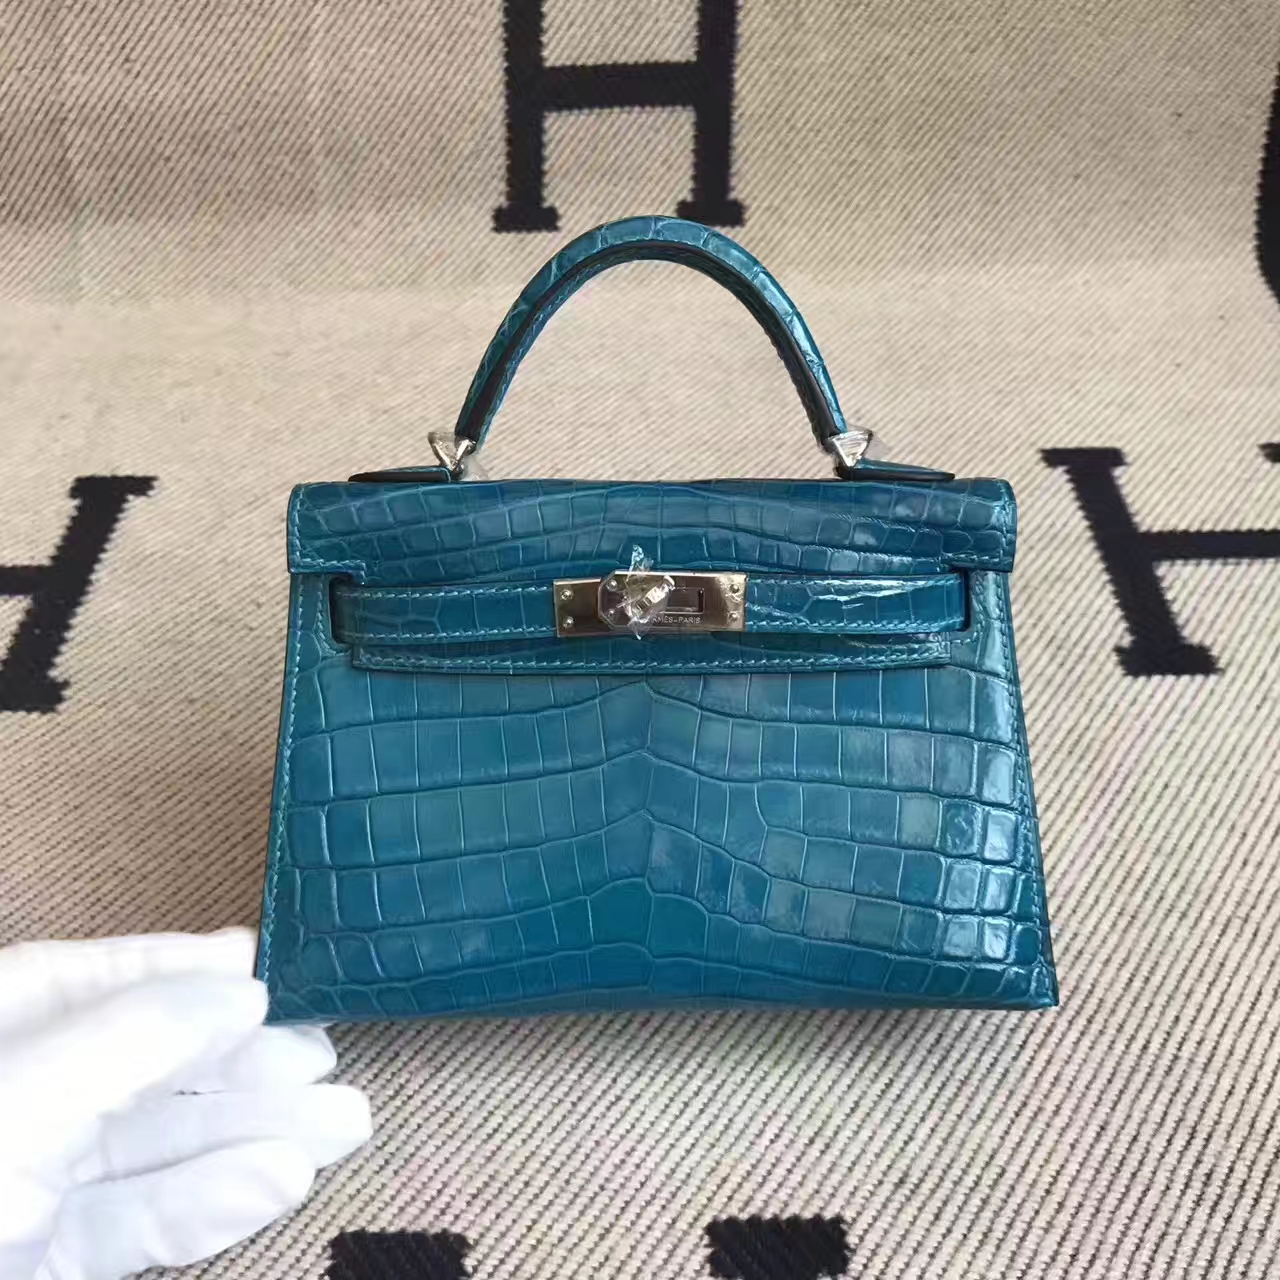 New Arrival Hermes Minikelly-2 Clutch Bag in 7W Blue Izmir Crocodile Leather